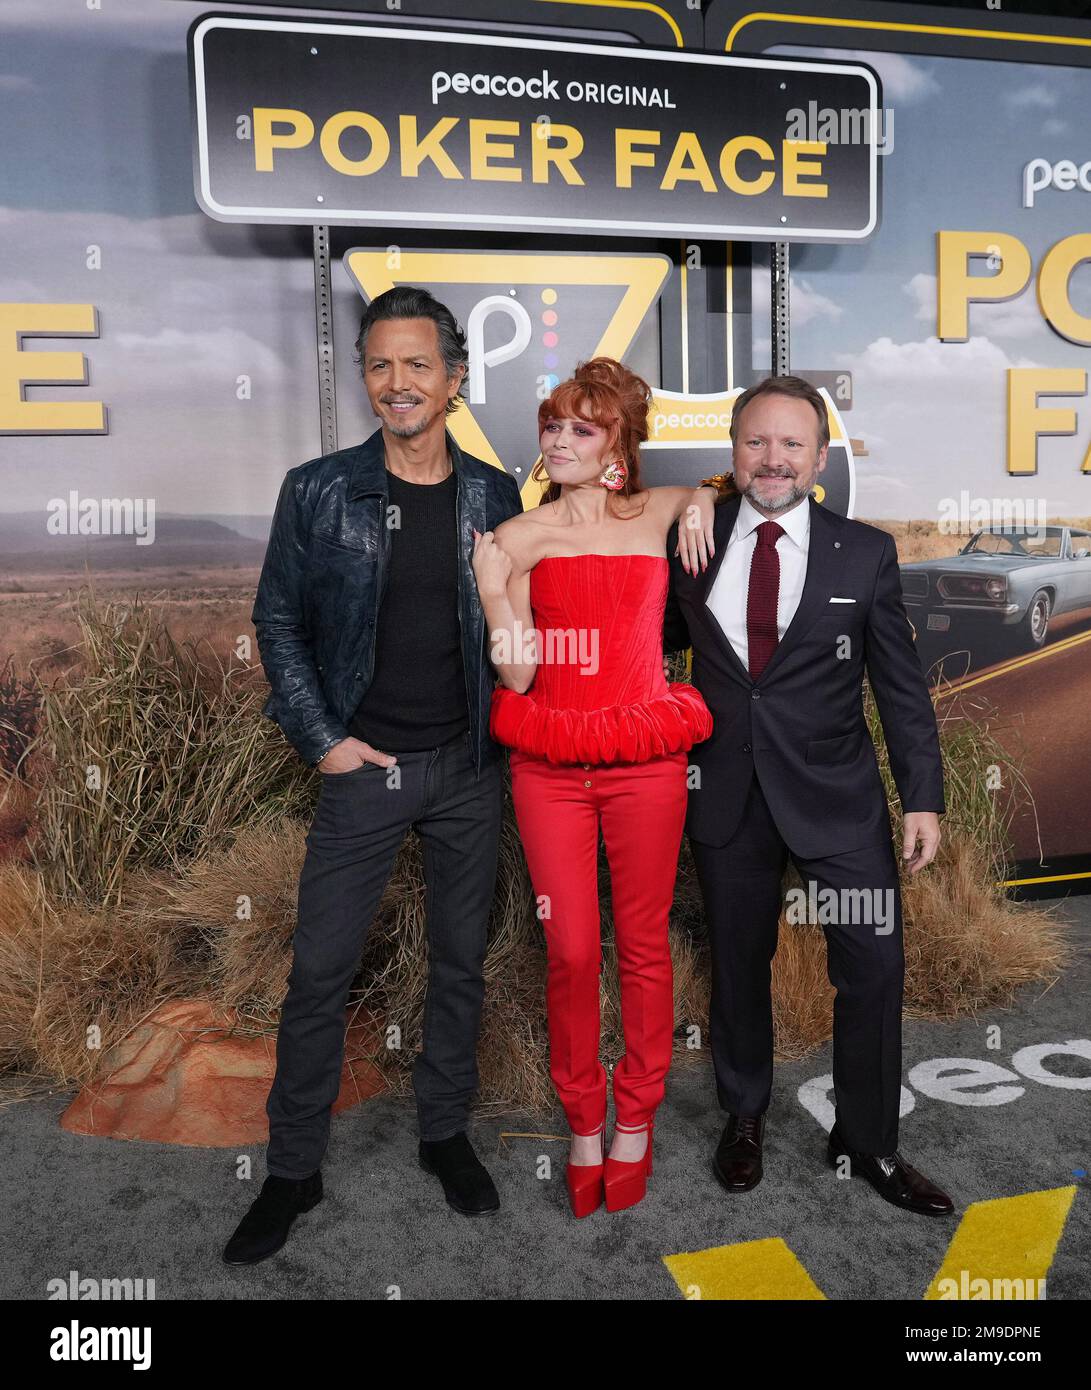 Rian Johnson Shares 'Poker Face' Details: It's More of a 'How